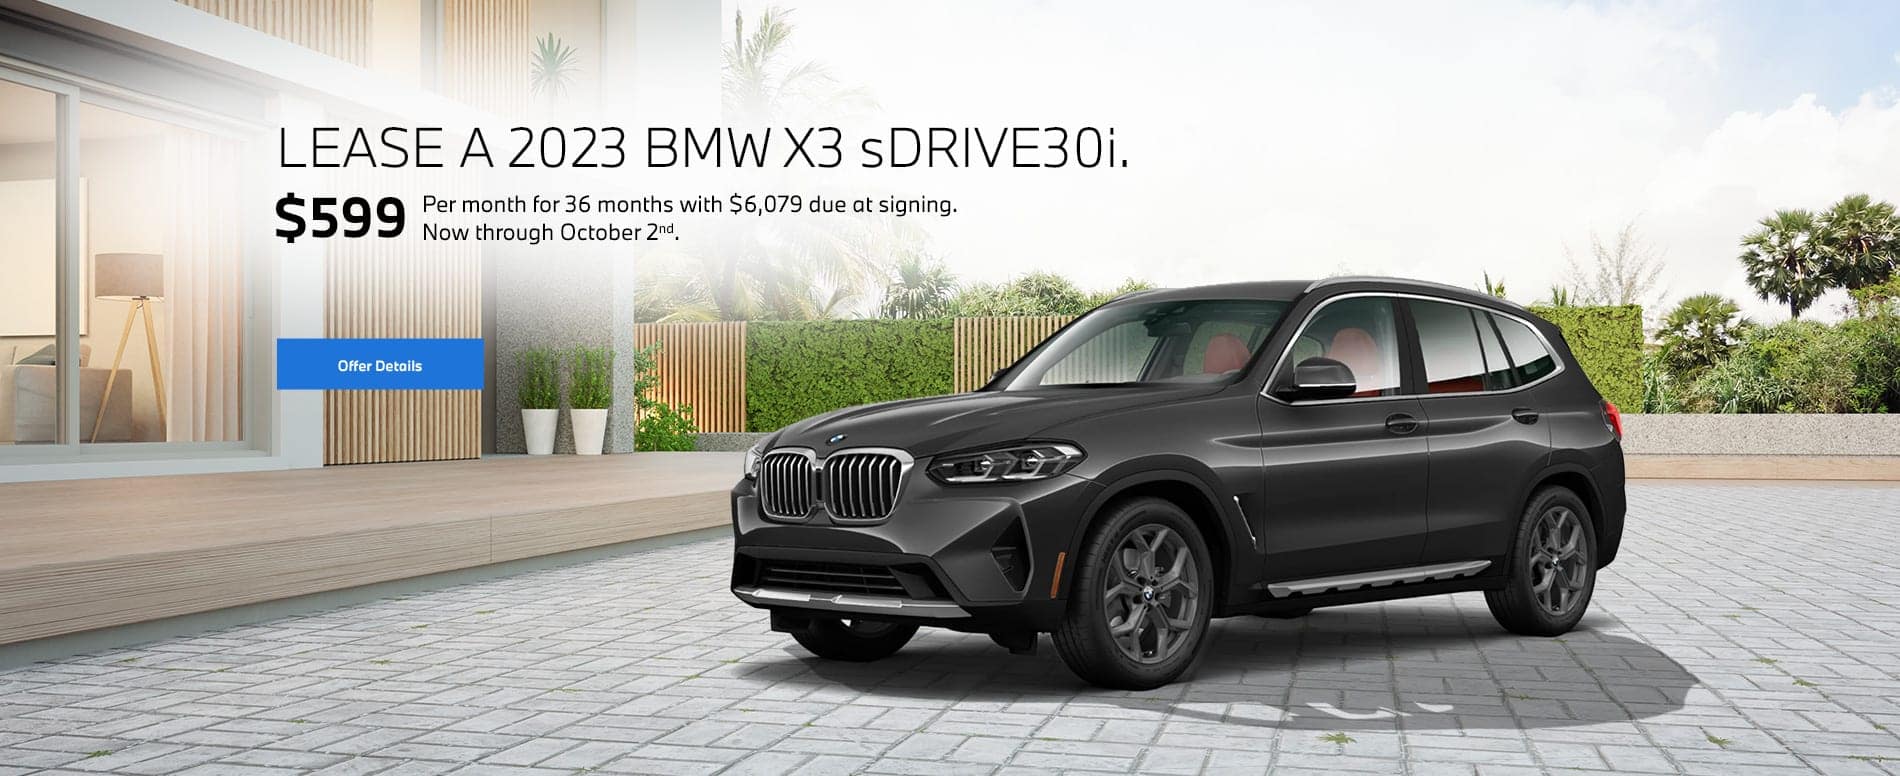 2023 X3 lease starting at $599 per month for 36 months